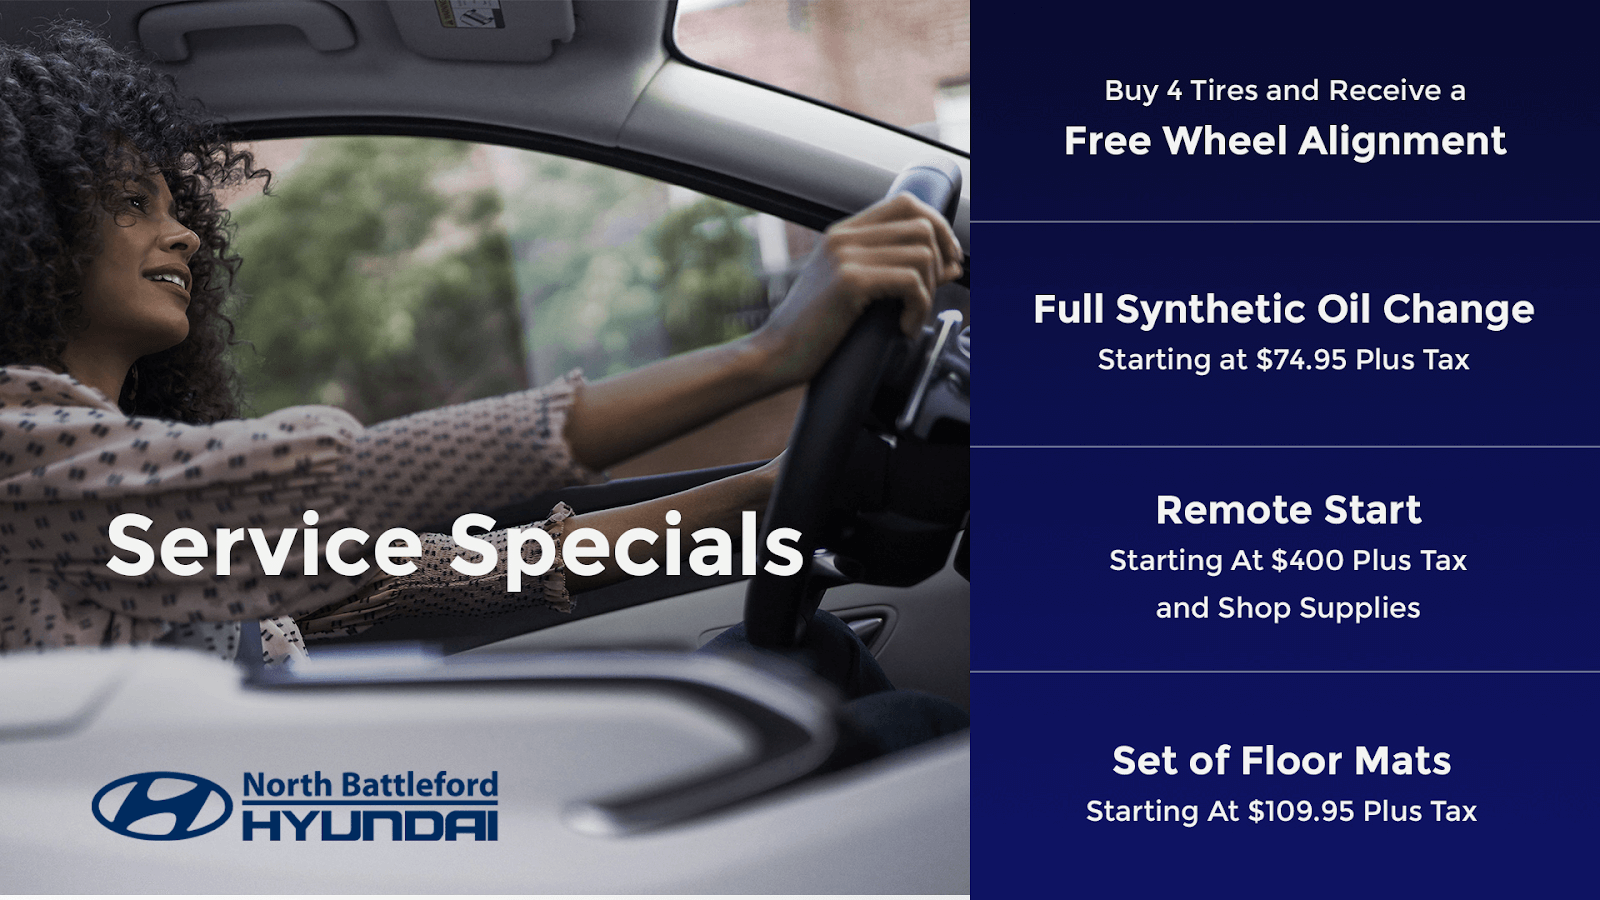 Woman driving a Hyundai vehicle with service specials listed